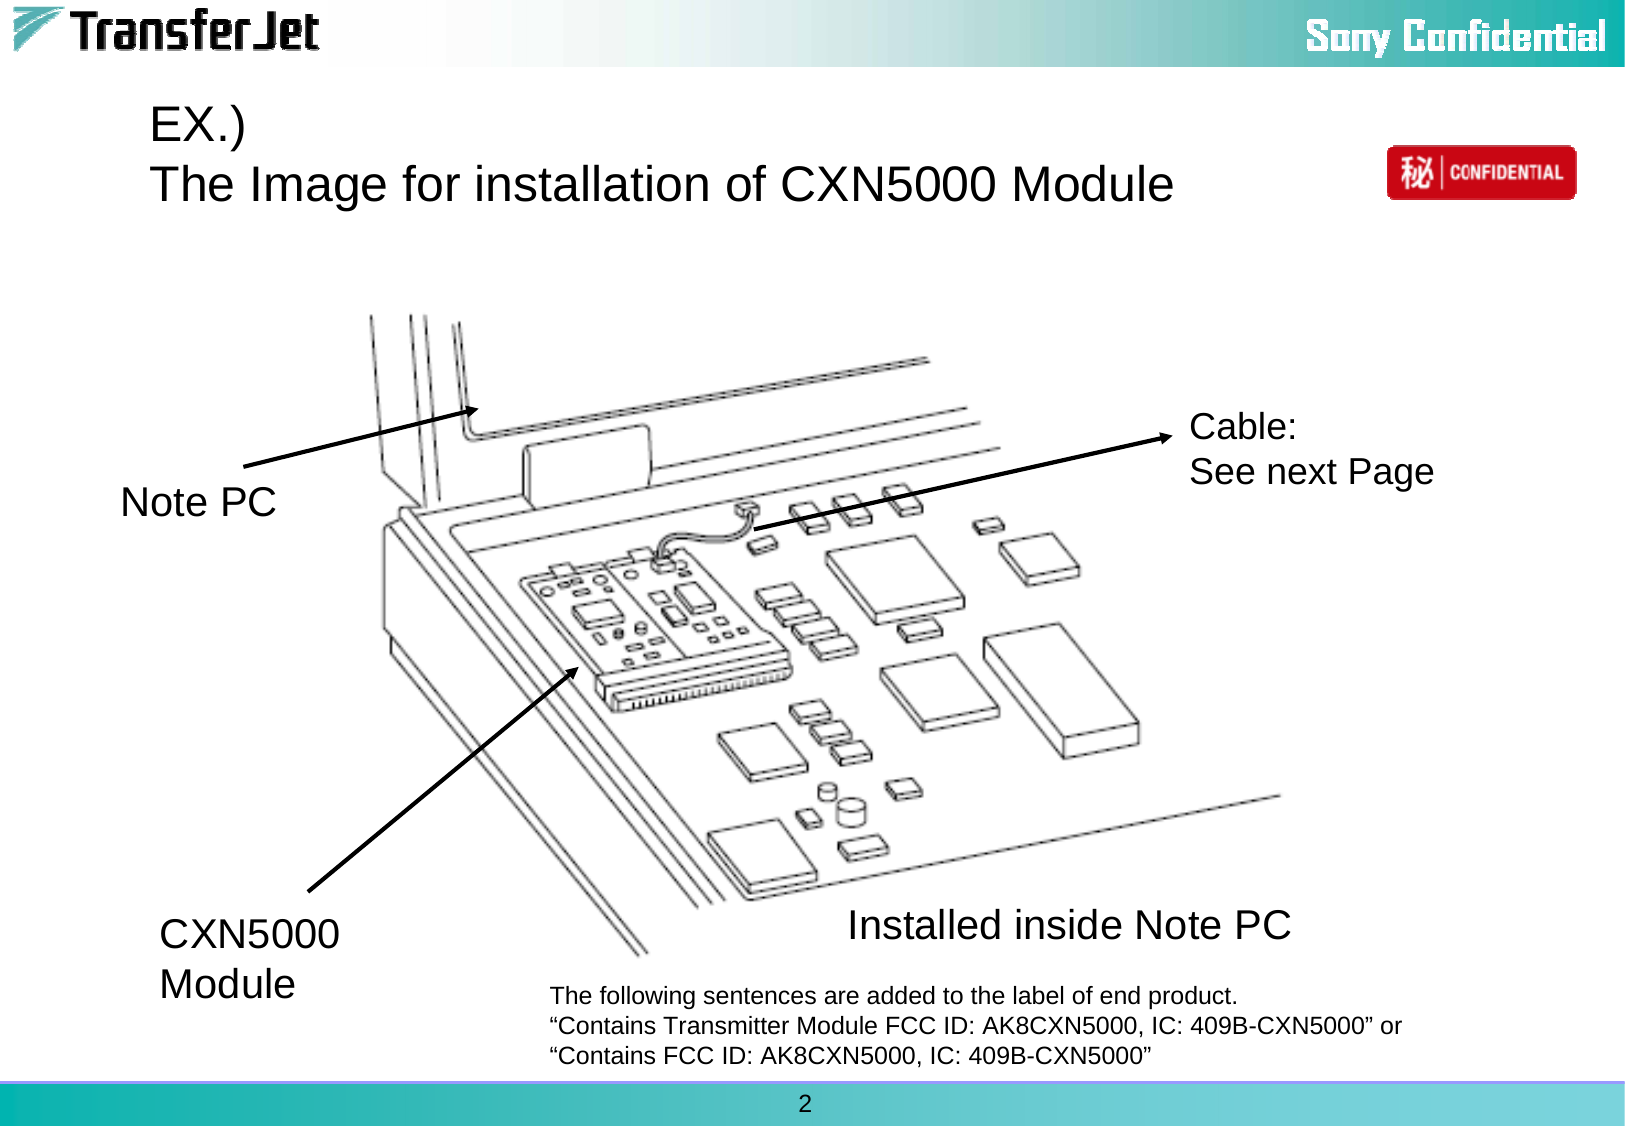 2EX.)The Image for installation of CXN5000 ModuleCXN5000 ModuleNote PCInstalled inside Note PCCable: See next PageThe following sentences are added to the label of end product.“Contains Transmitter Module FCC ID: AK8CXN5000, IC: 409B-CXN5000” or“Contains FCC ID: AK8CXN5000, IC: 409B-CXN5000”